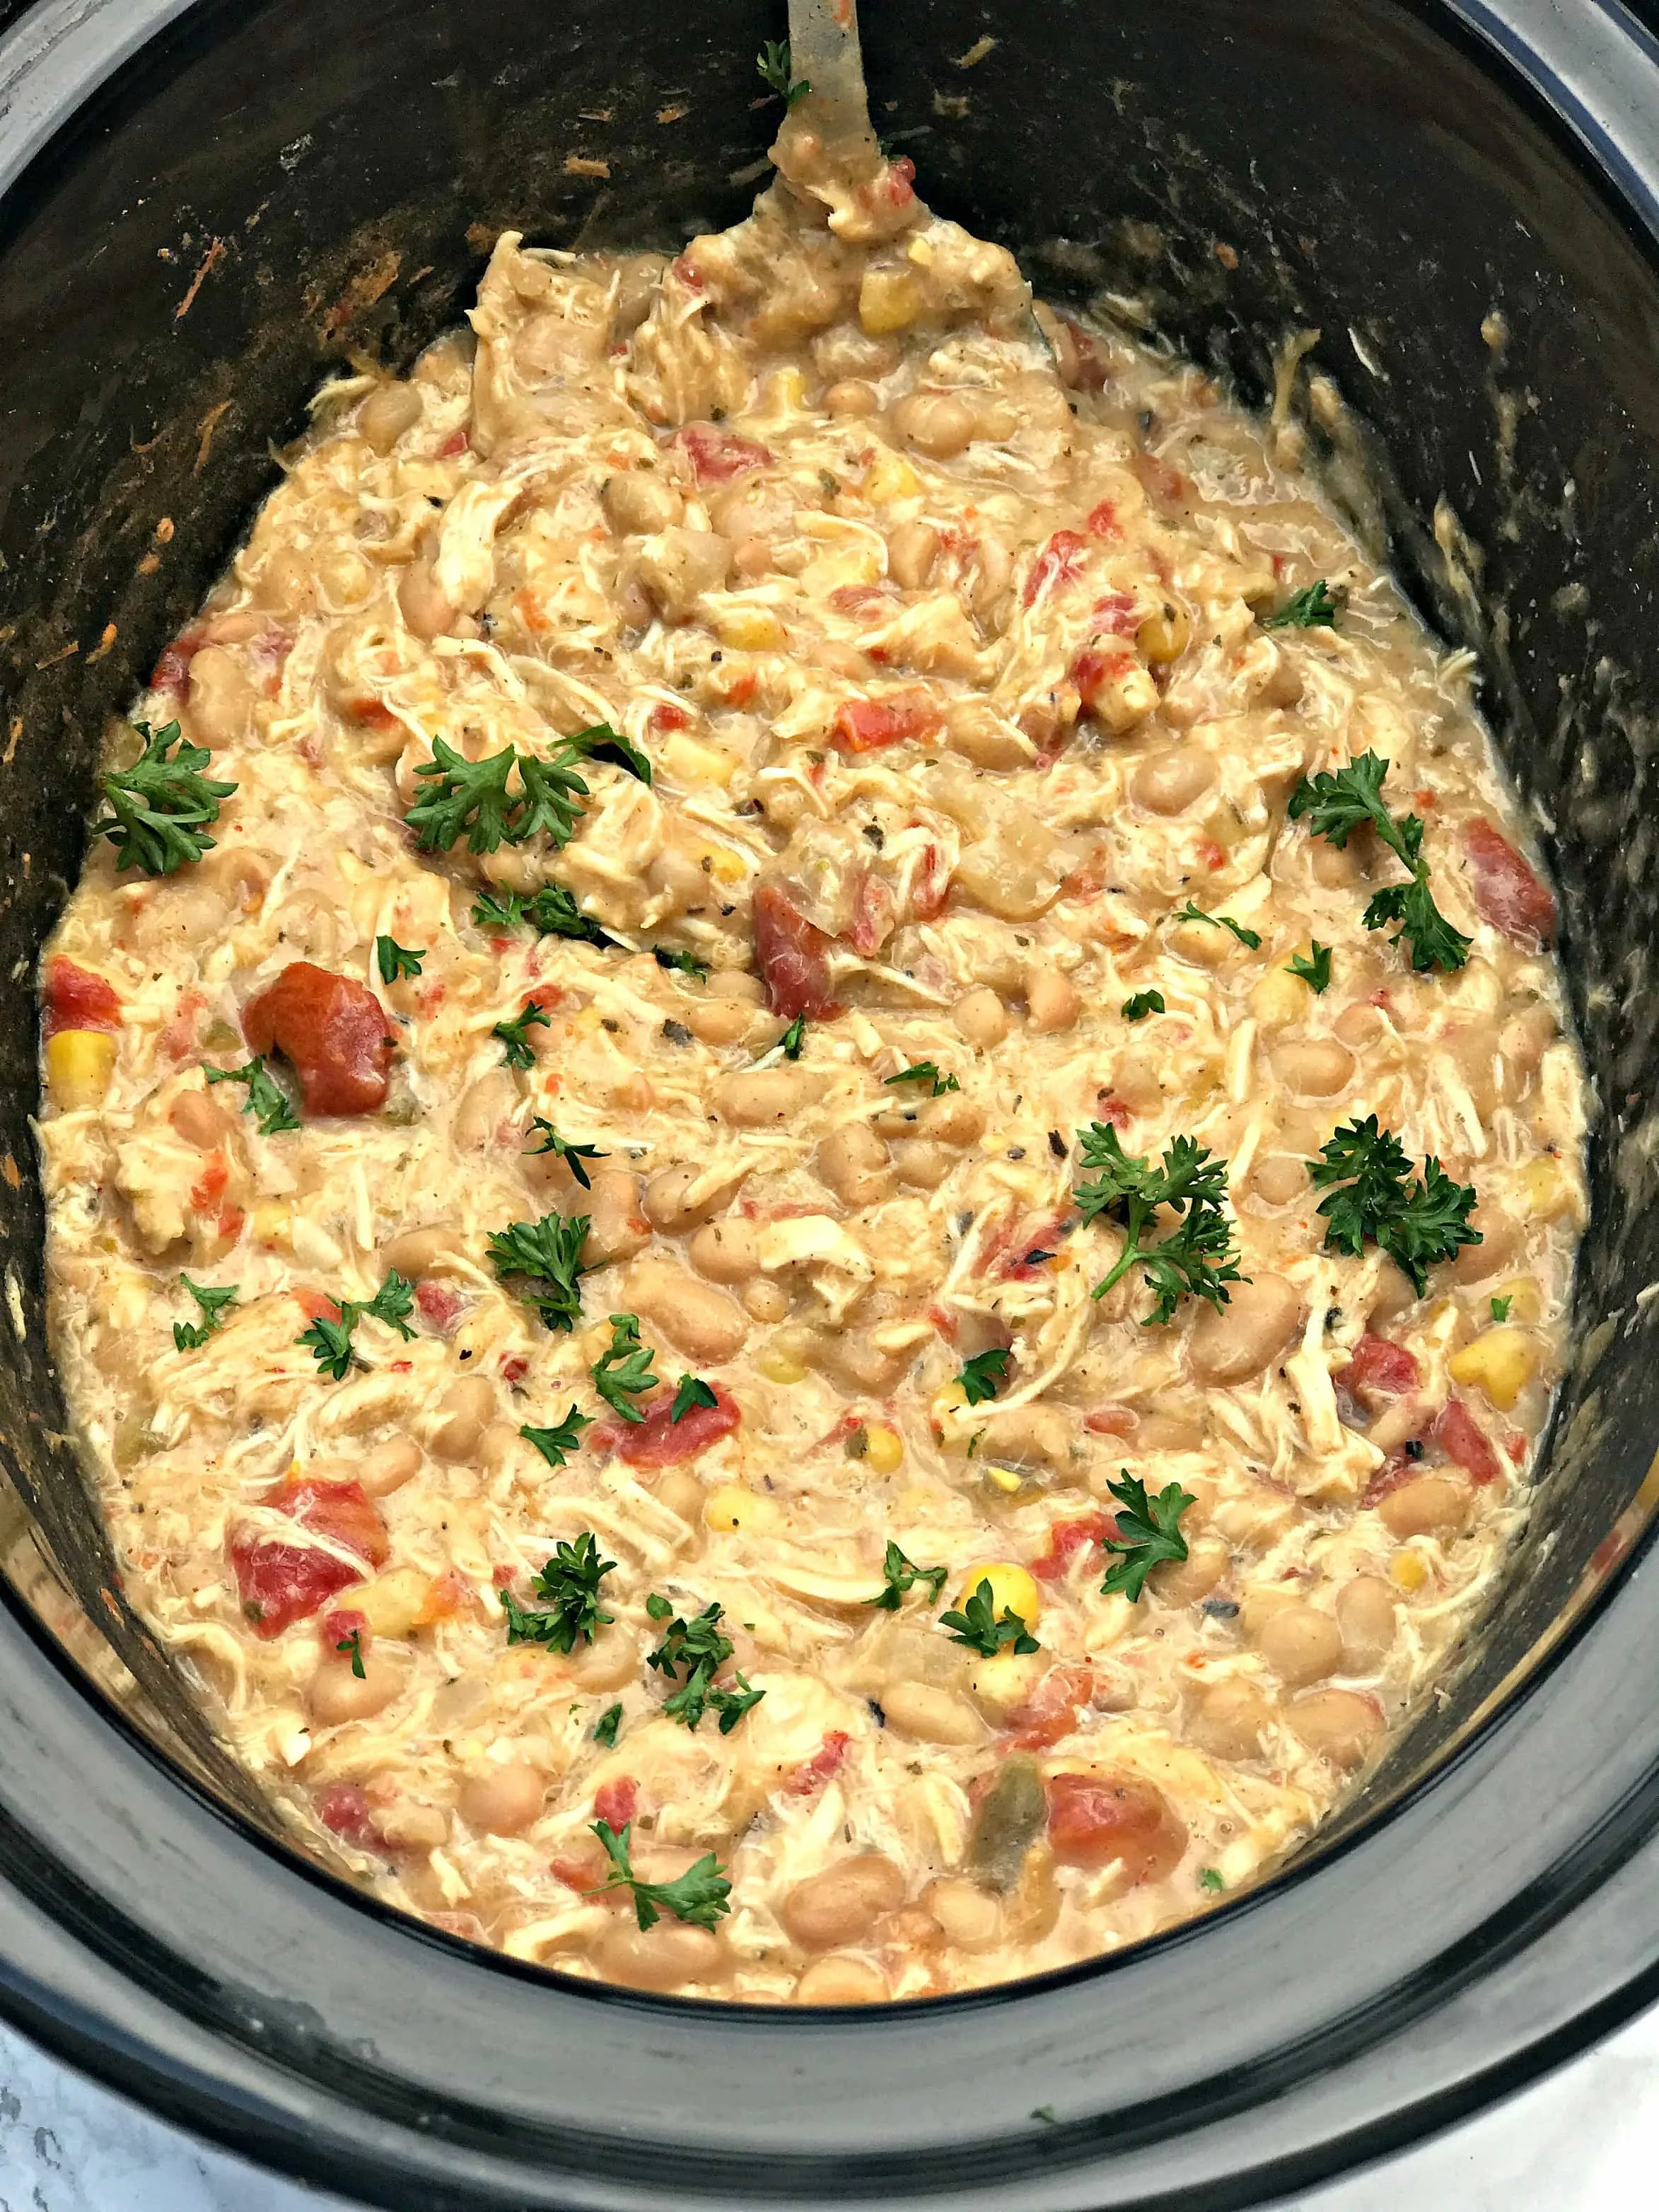 Healthy Slow Cooker White Chicken Chili